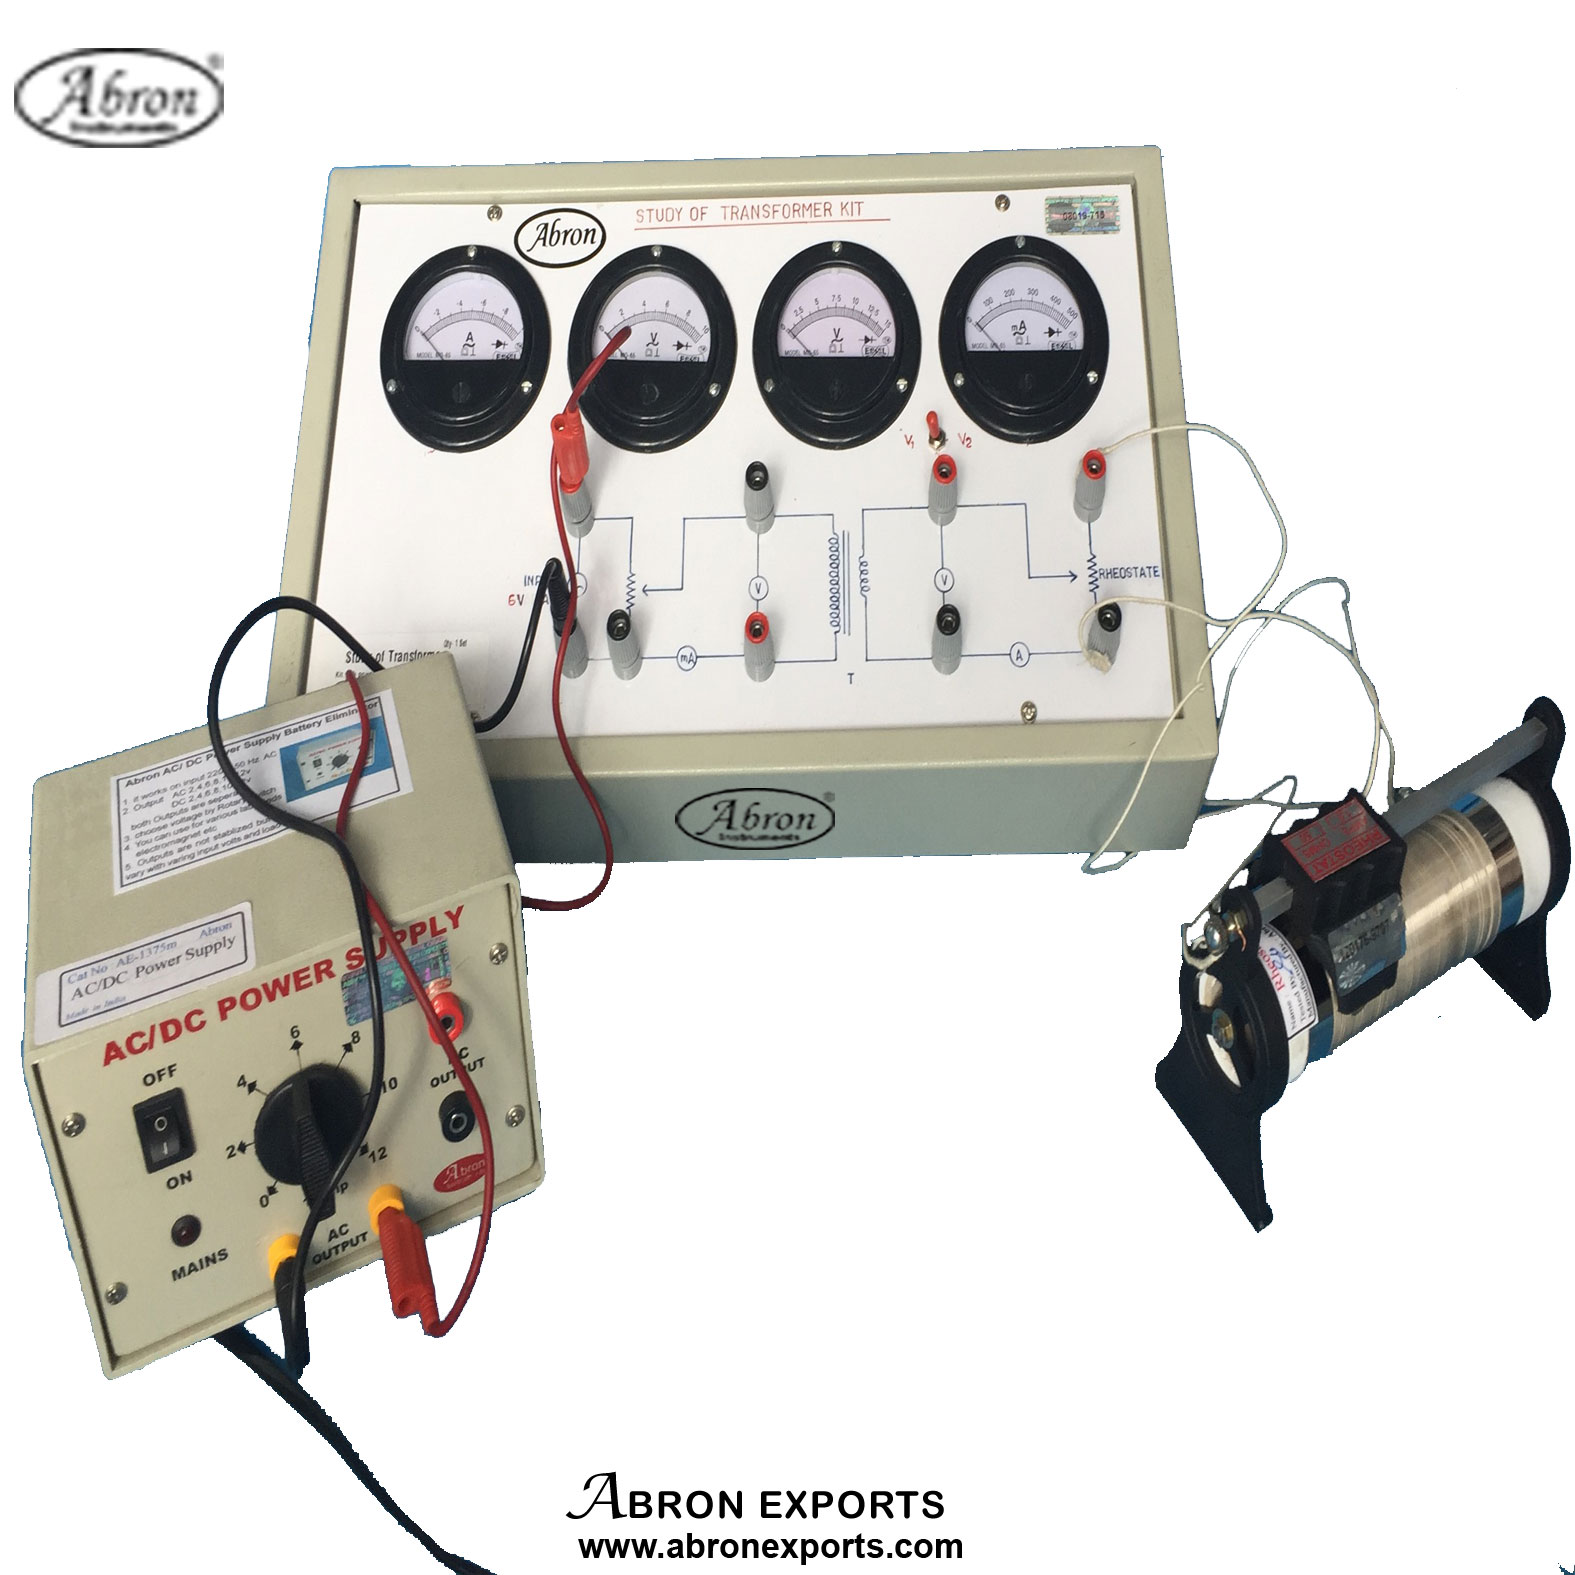 Study-of-transformer-kit-training-kit-with-4-meters-with-power-supply-abron AE1439b